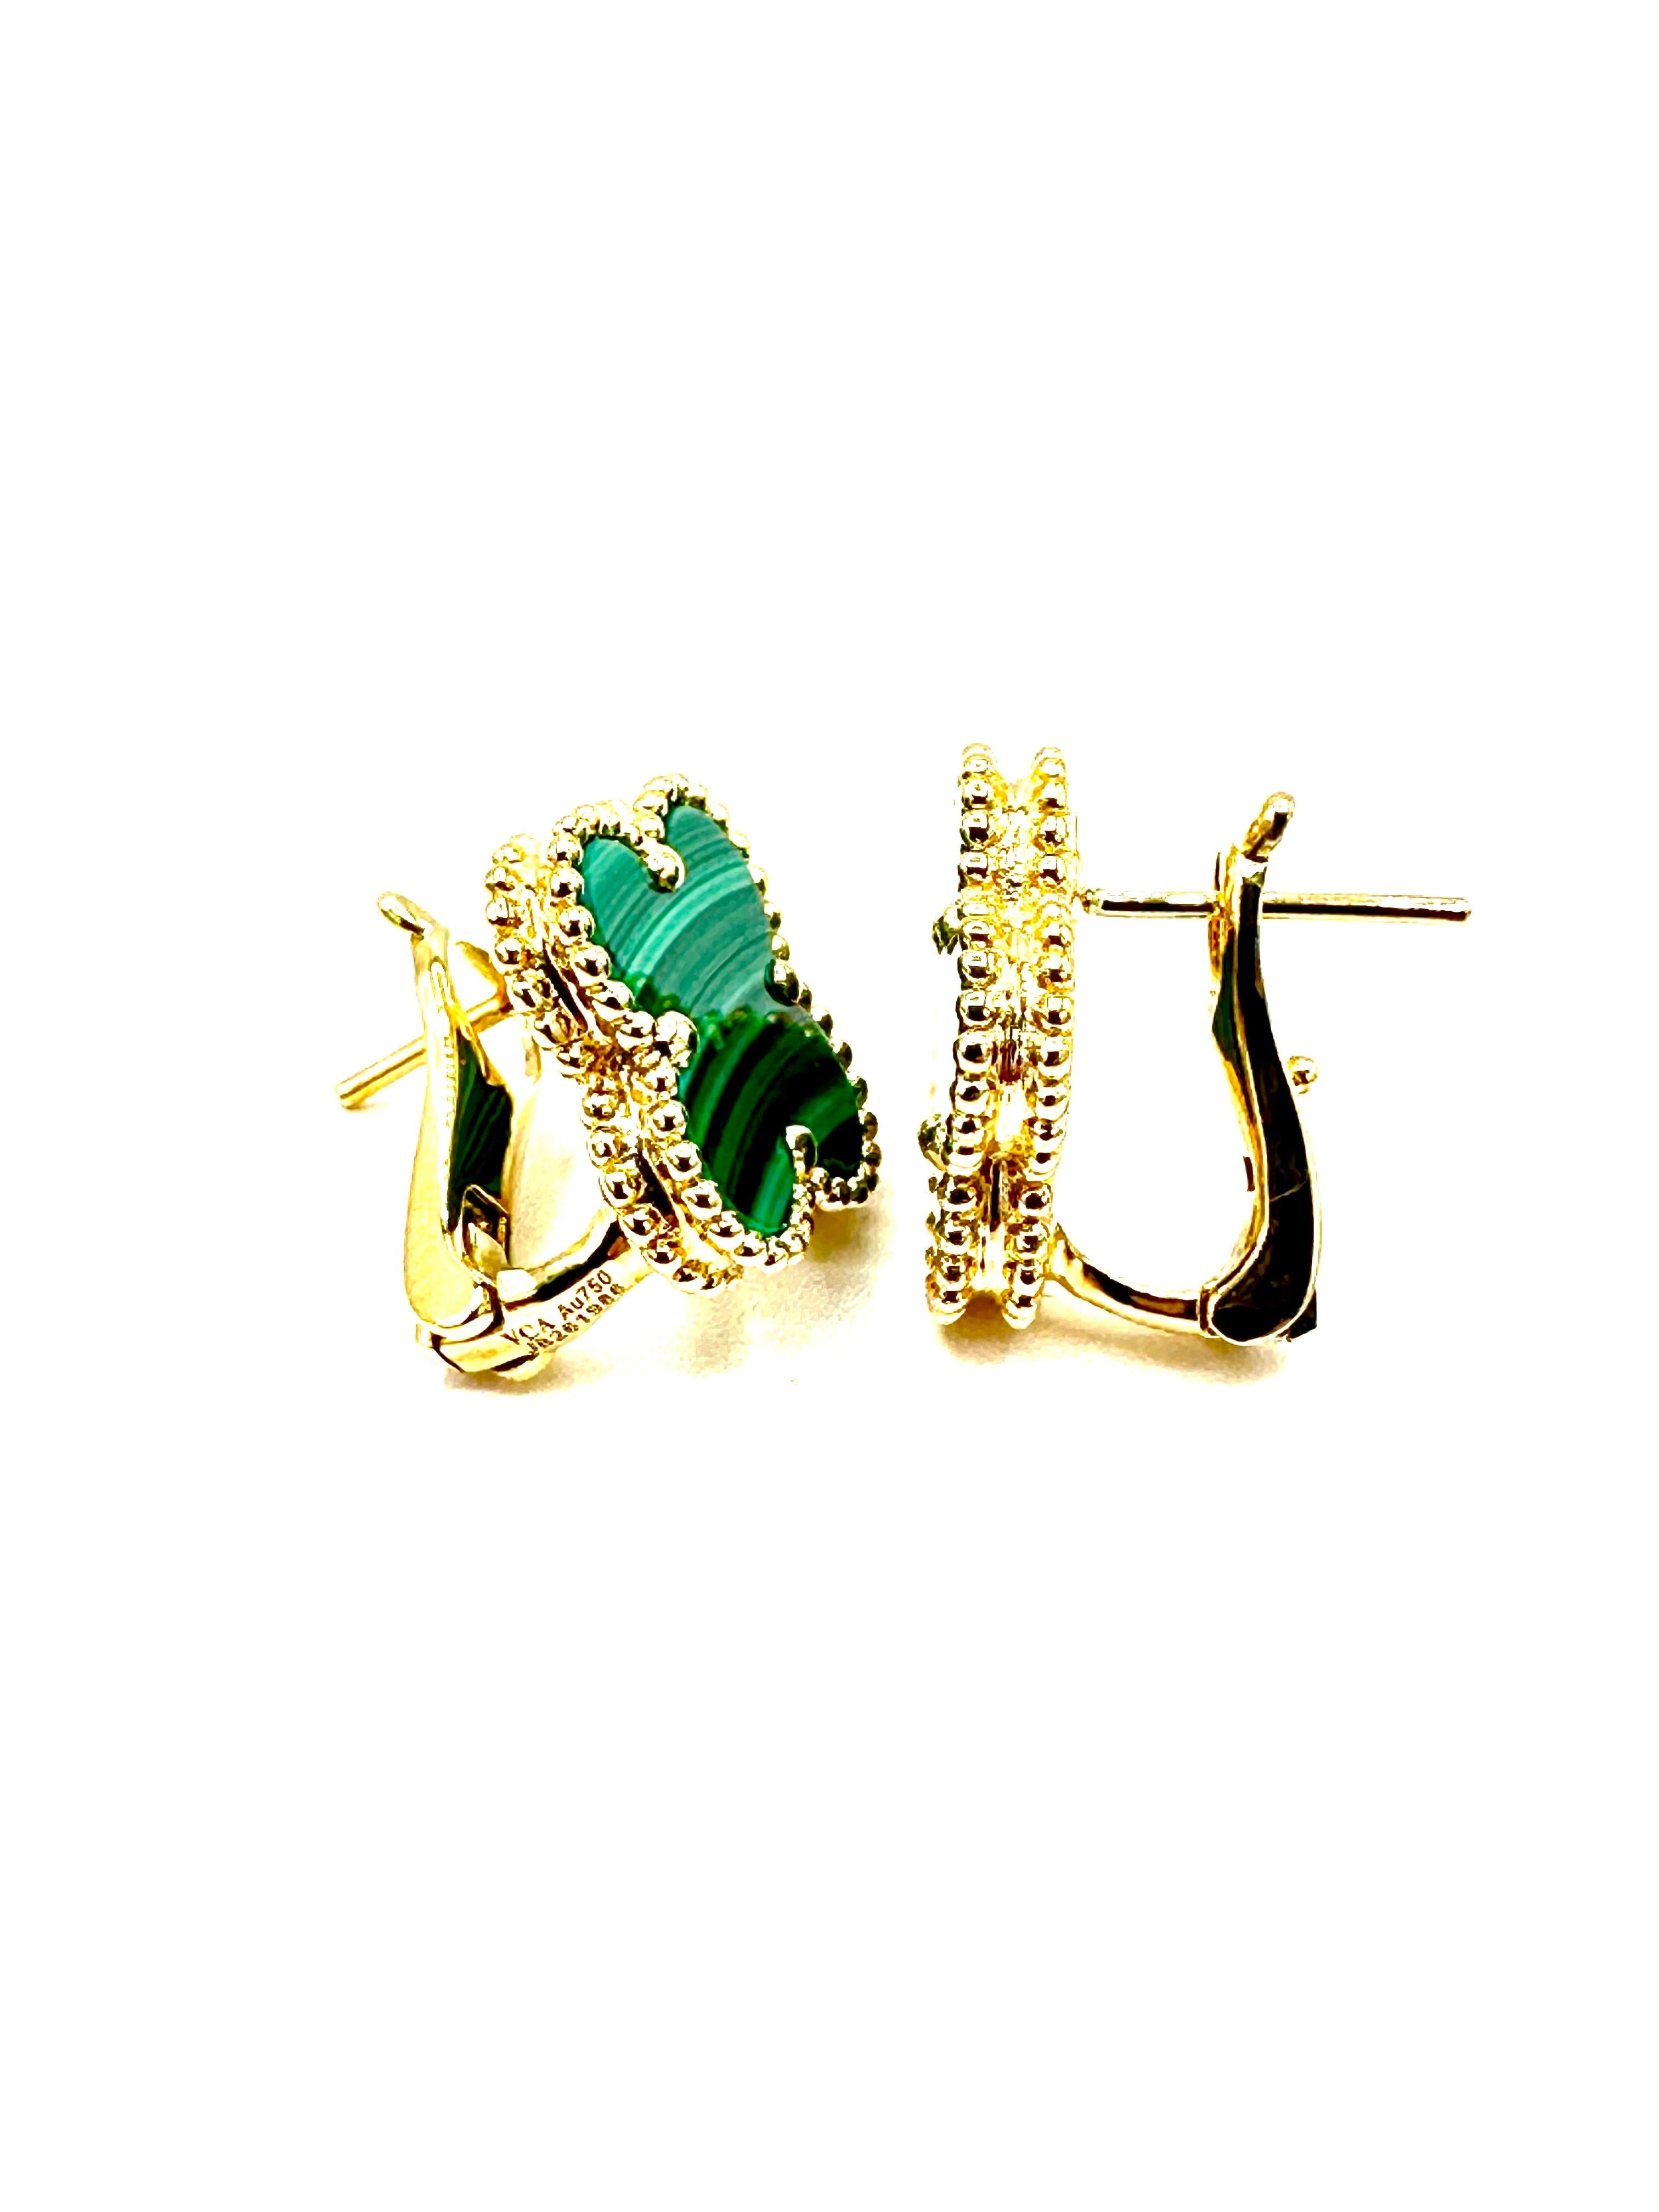 Van Cleef & Arpels Vinatge Alhambra Malachite and 18K Yellow Gold Earrings  For Sale 3